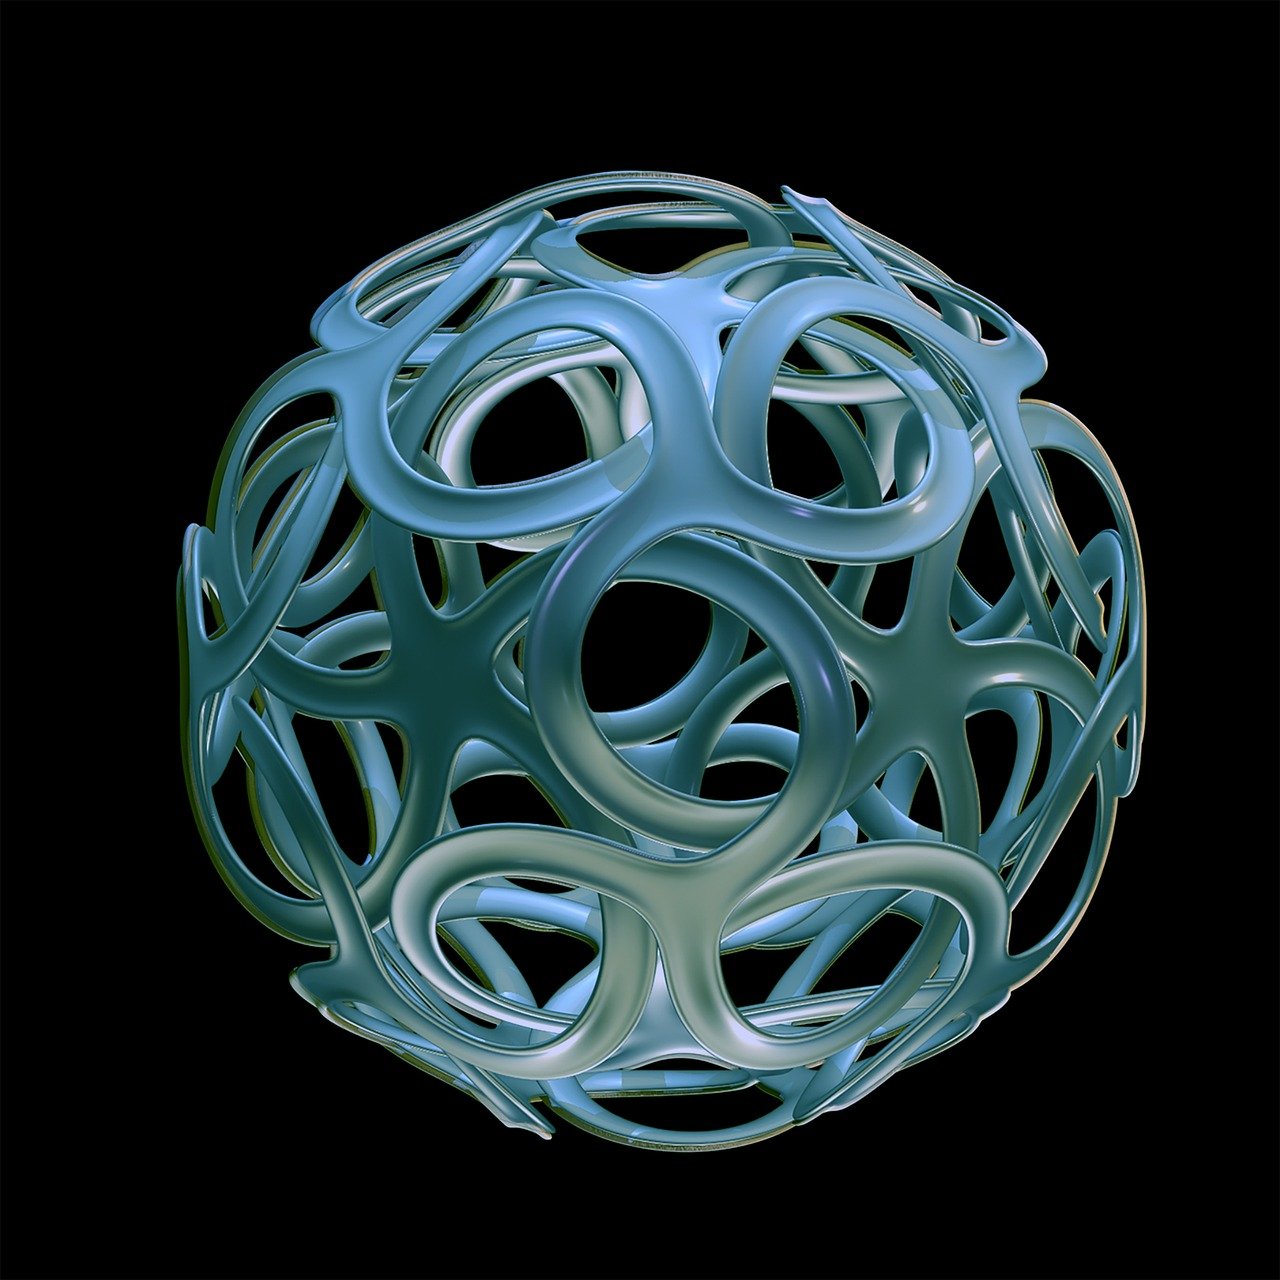 a close up of a blue object on a black background, an abstract sculpture, inspired by Buckminster Fuller, zbrush central, digital art, cycles4d render, rounded shapes, intertwined full body view, rendered illustration